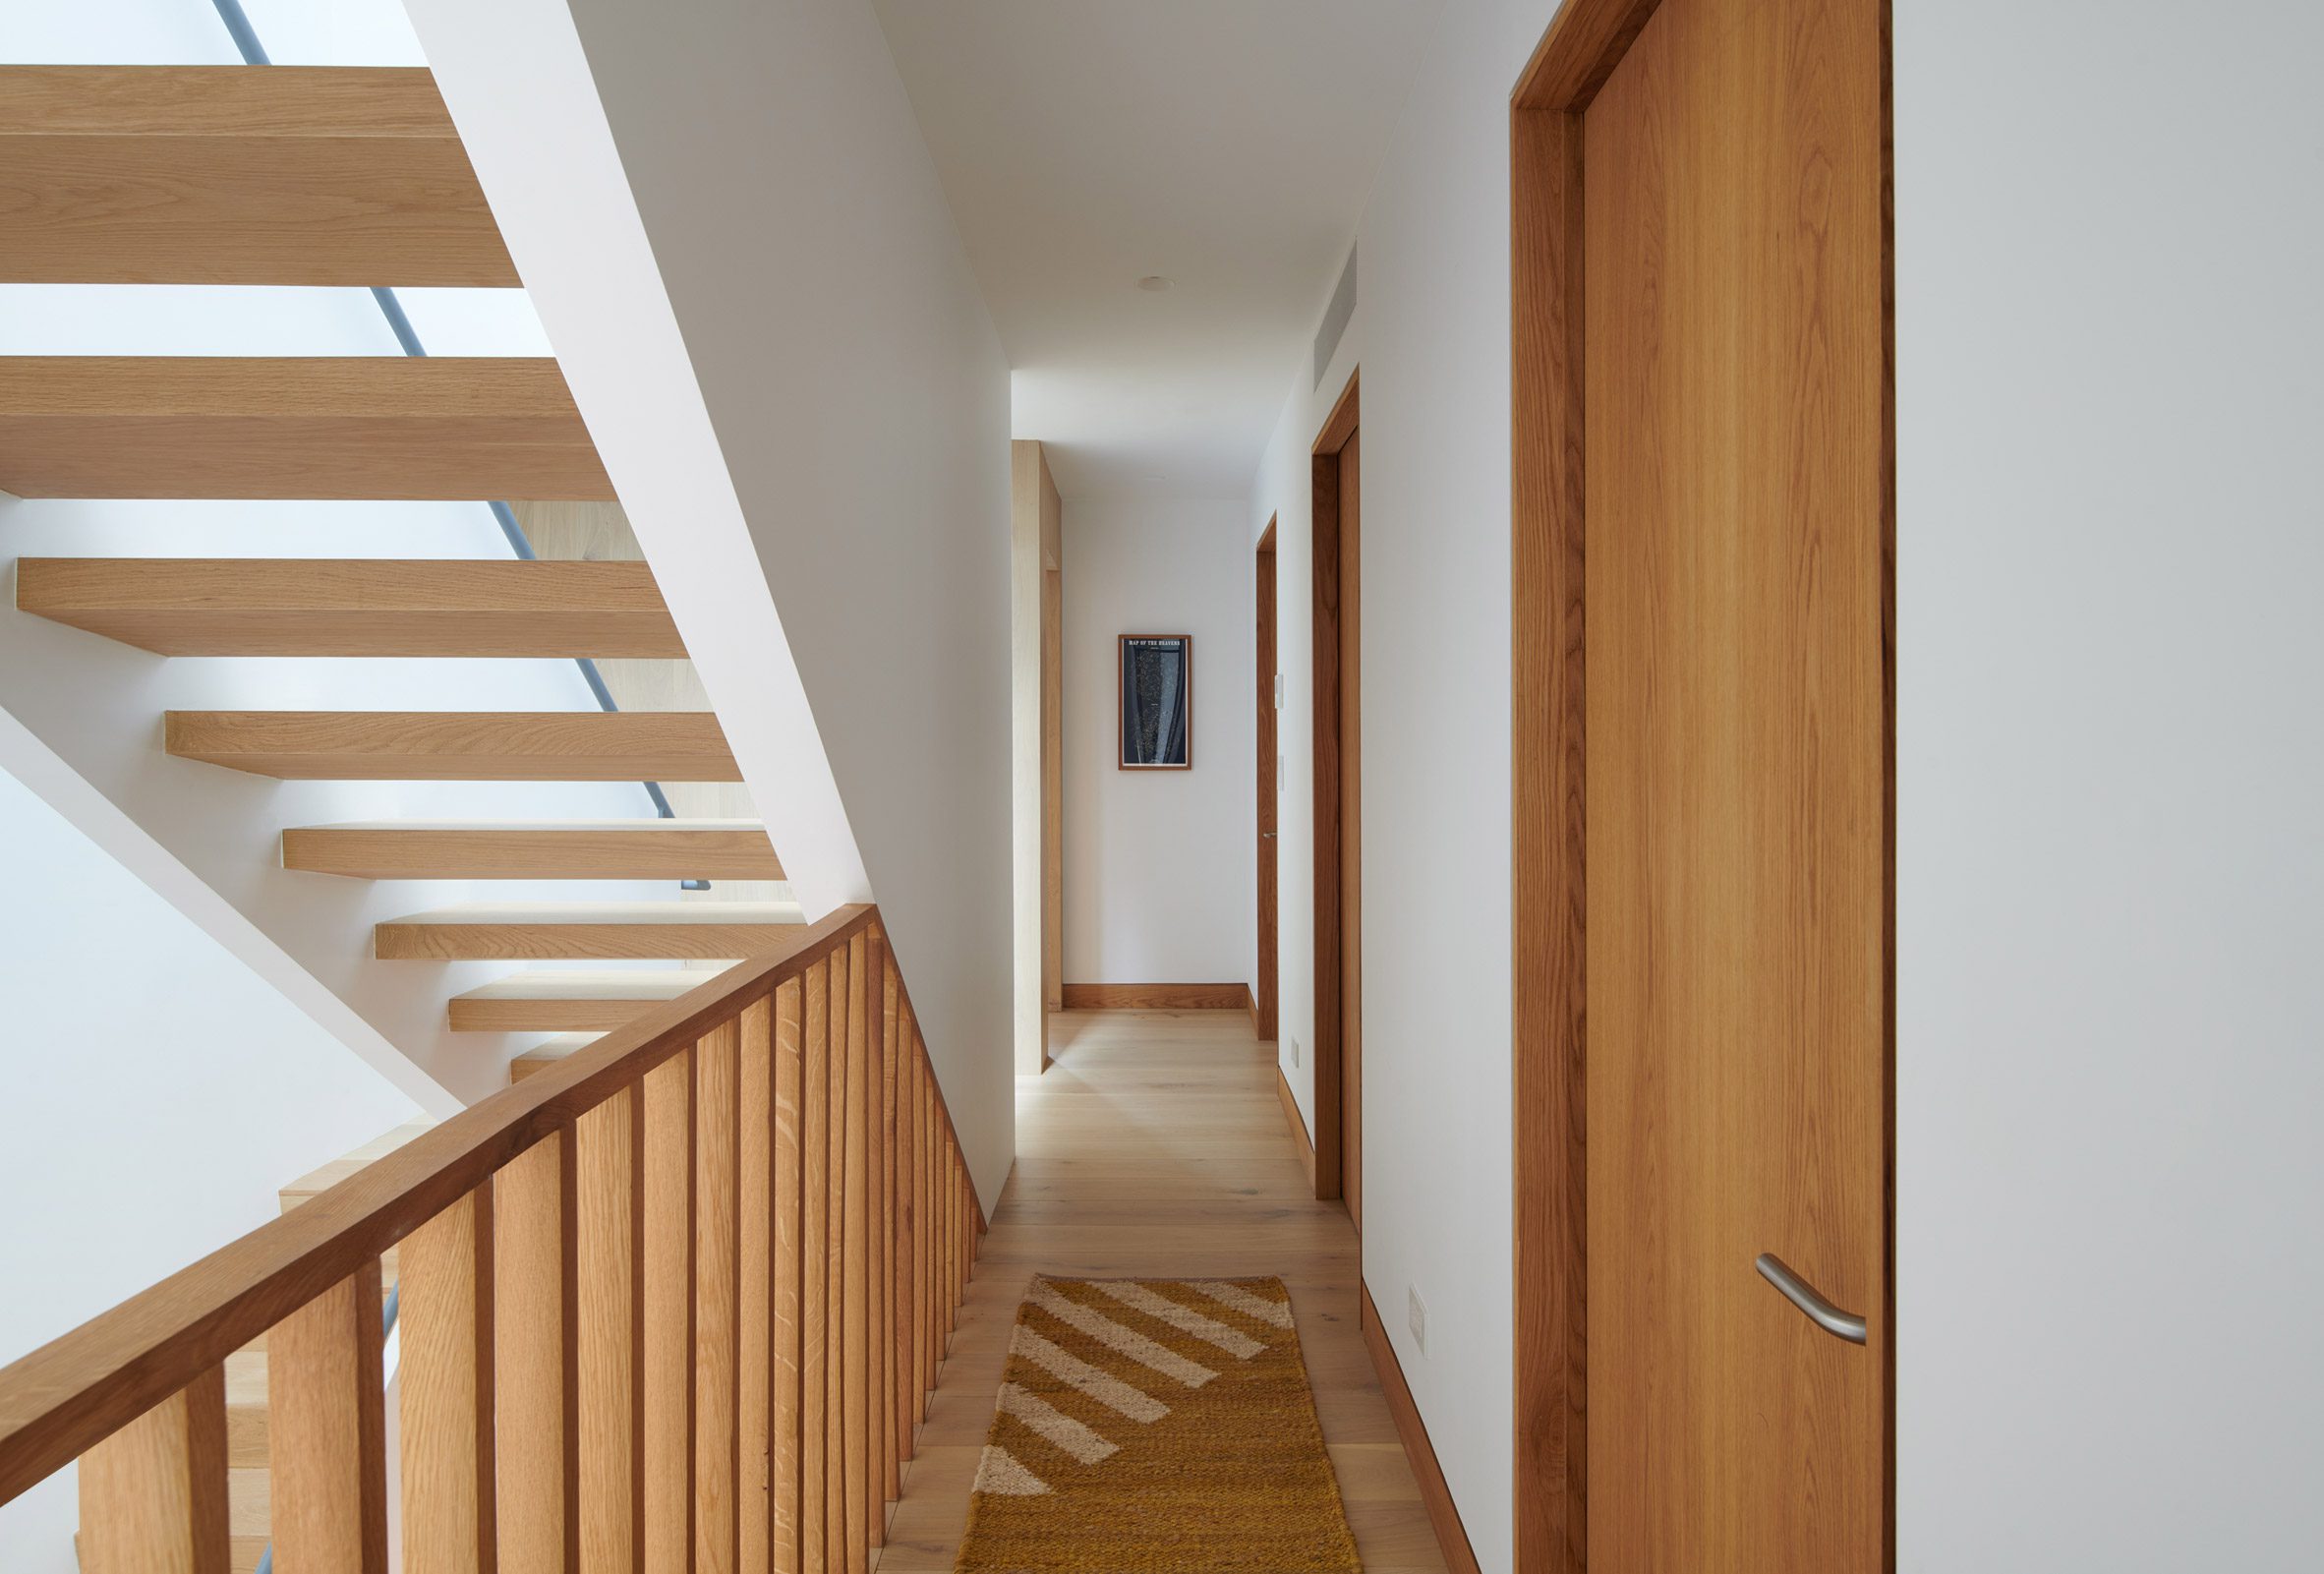 Switchback staircase beside a corridor with wooden doors